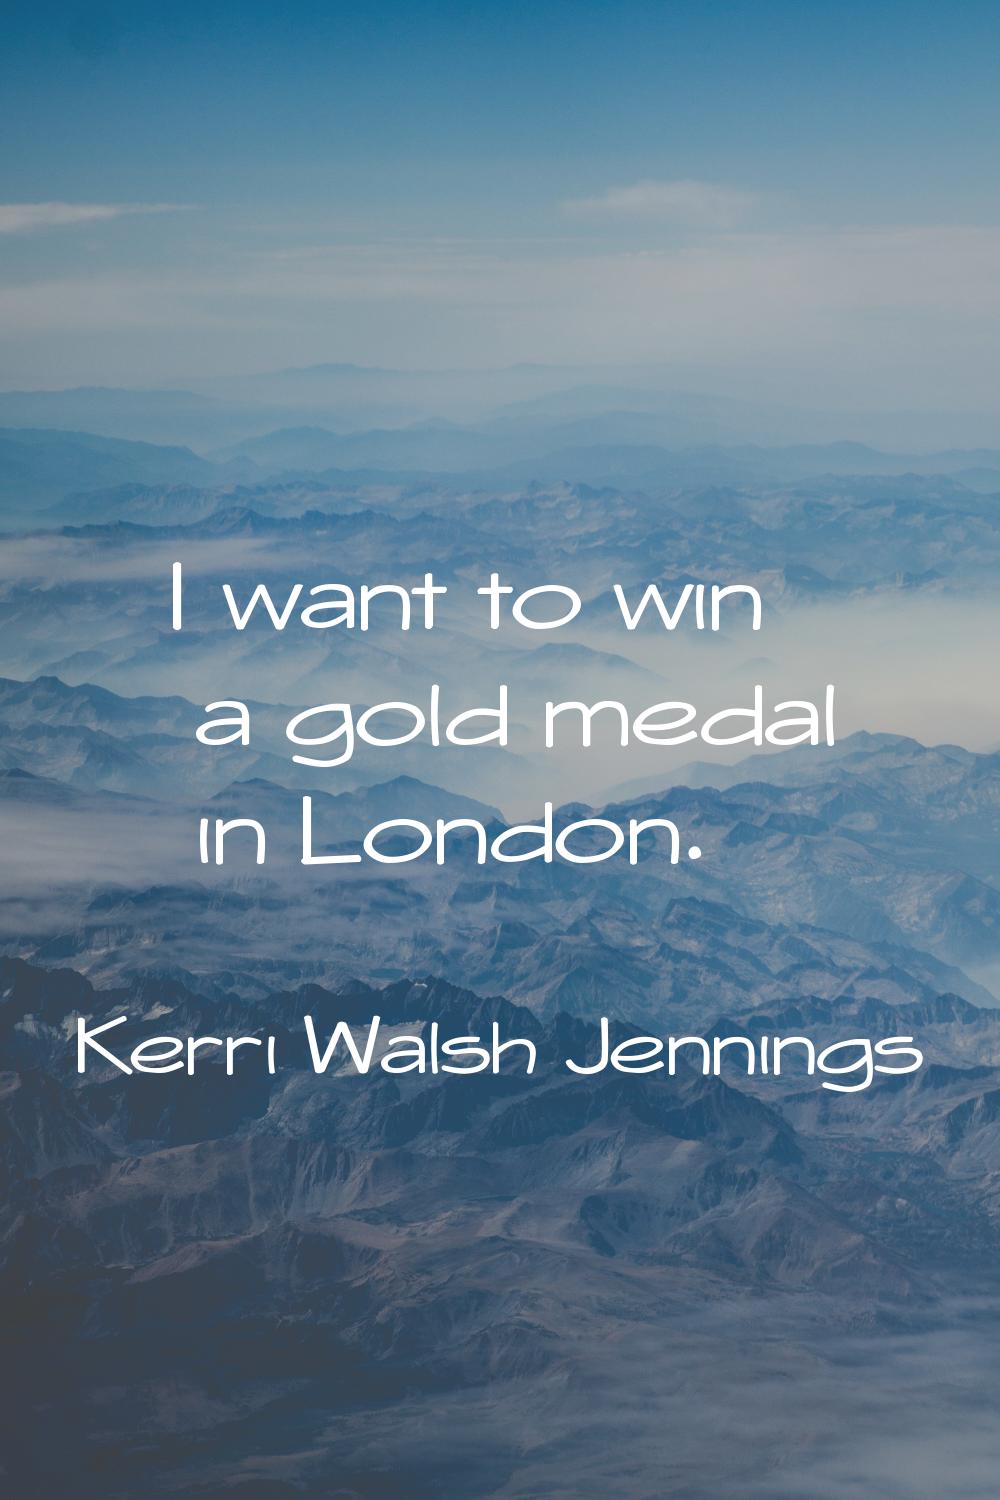 I want to win a gold medal in London.